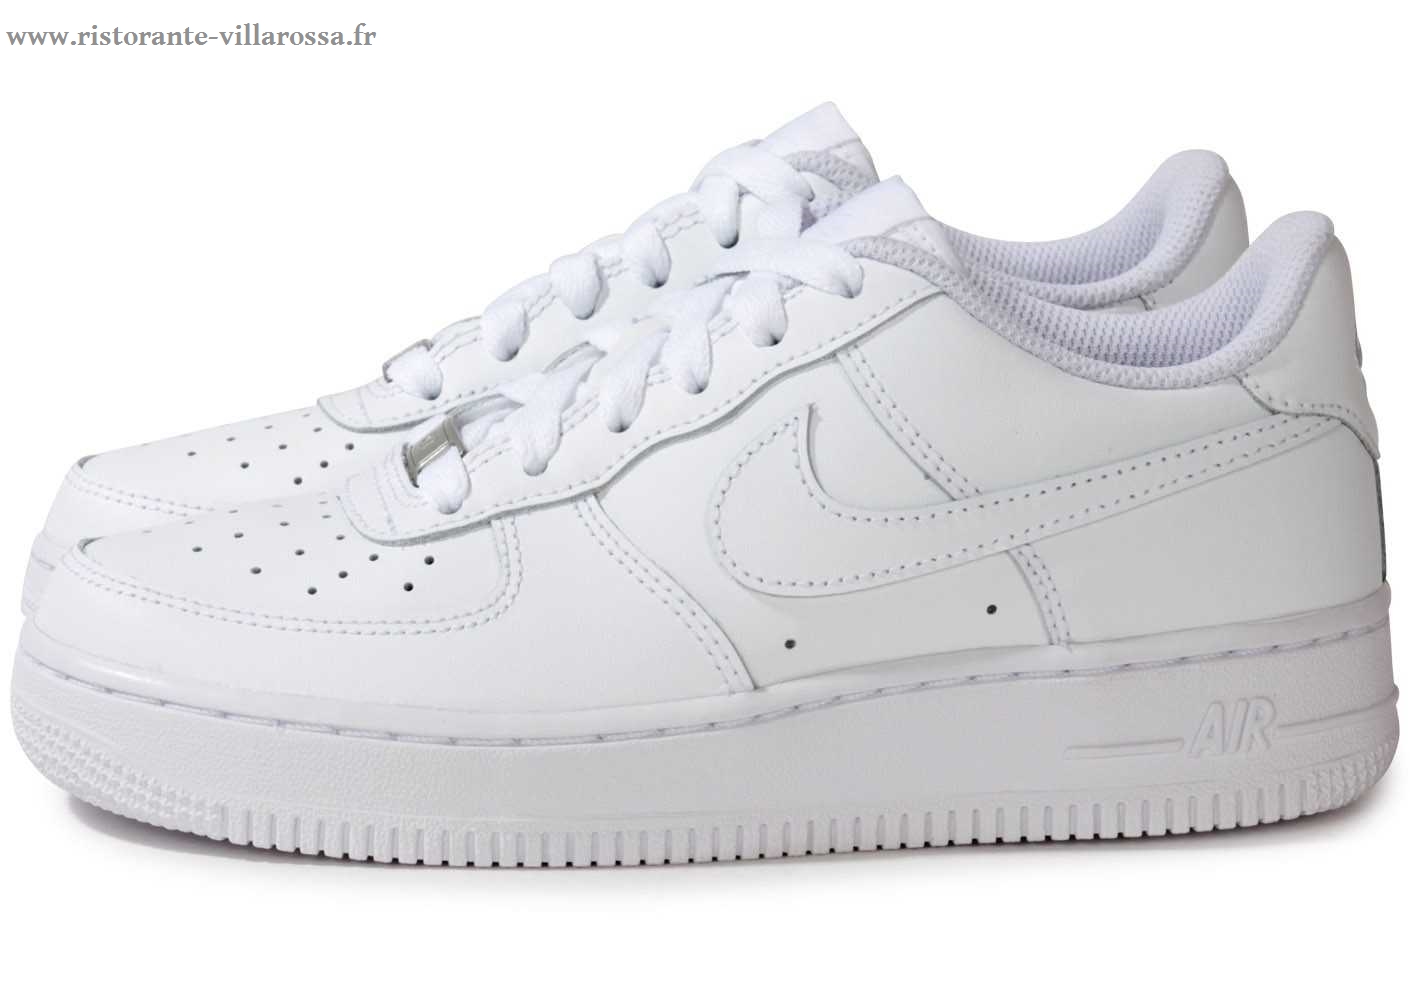 nike chaussures blanches, Réductions C/o|Rb Blanc Nike Air Force 1 Junior Blanche Chaussures Nike